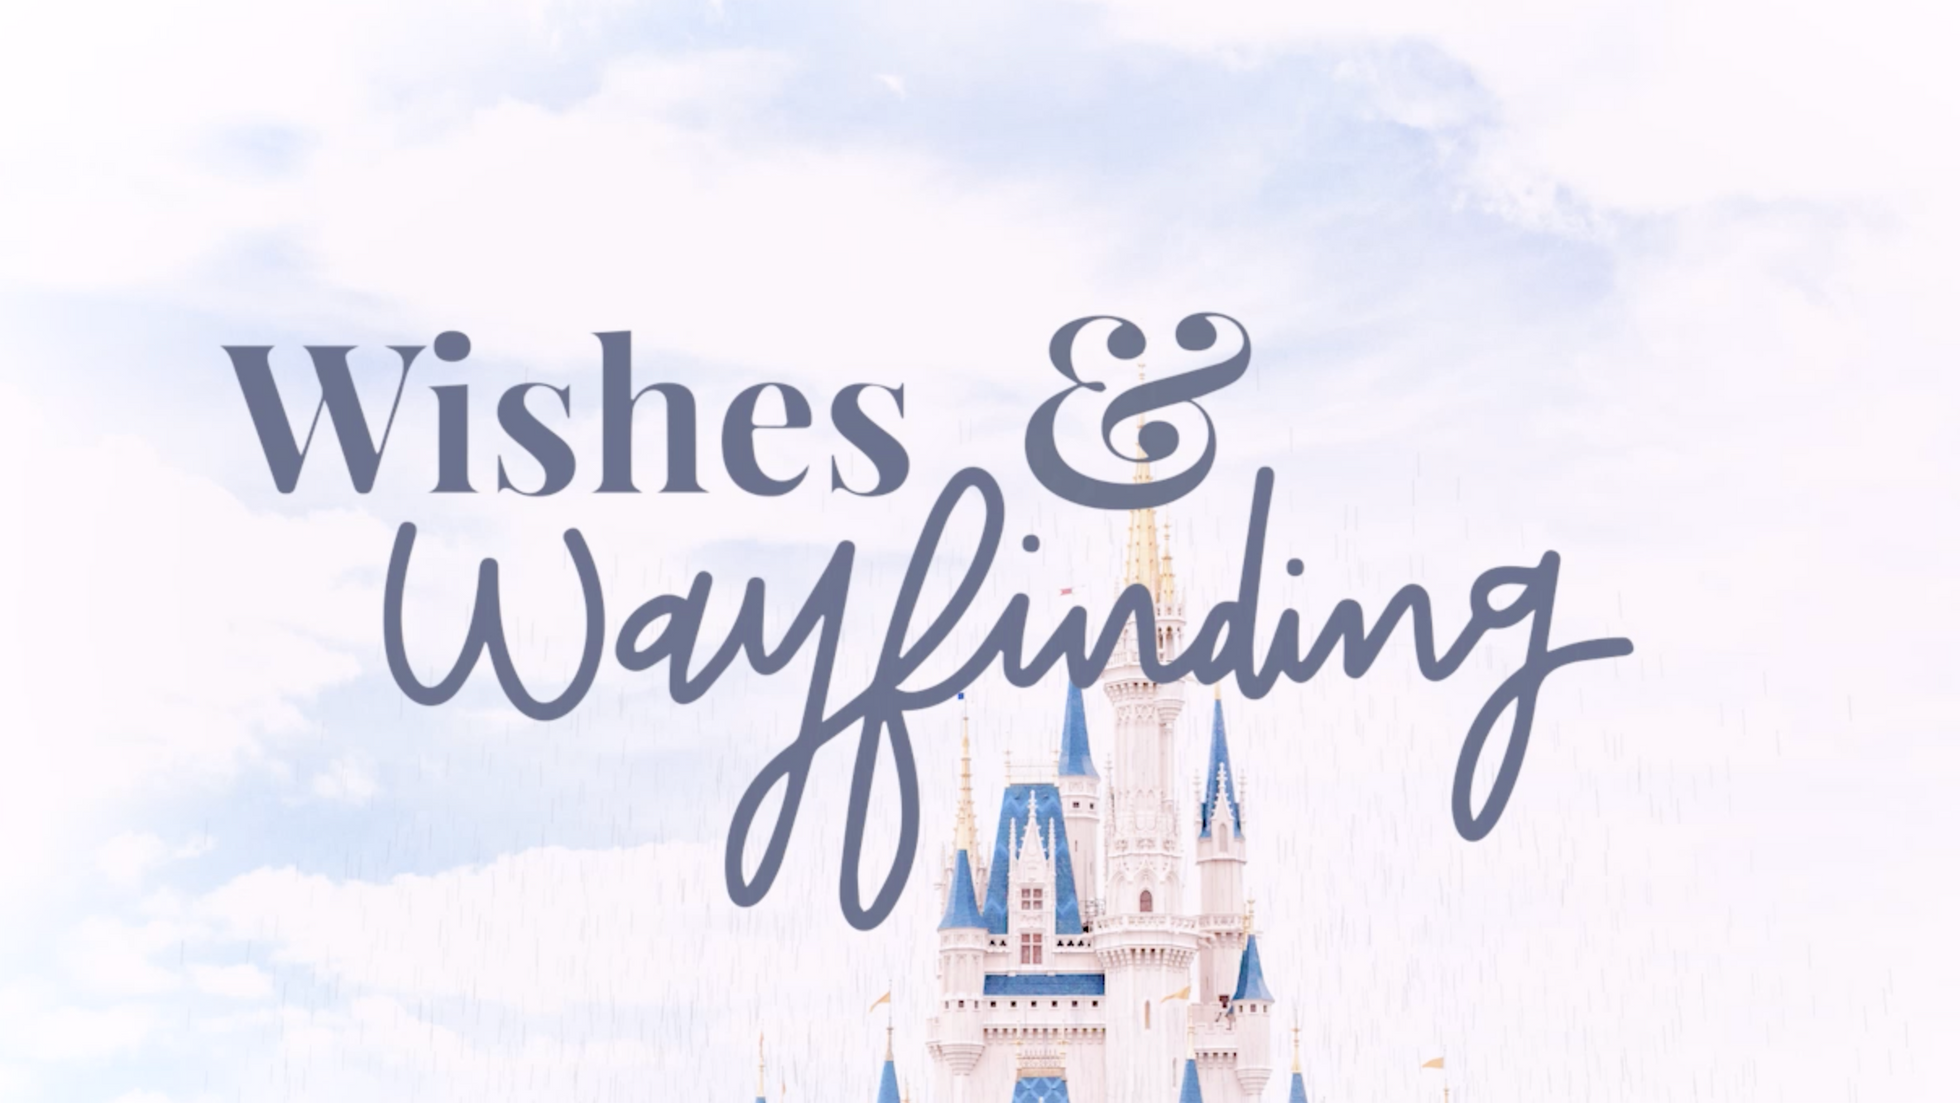 Why Wishes & Wayfinding?